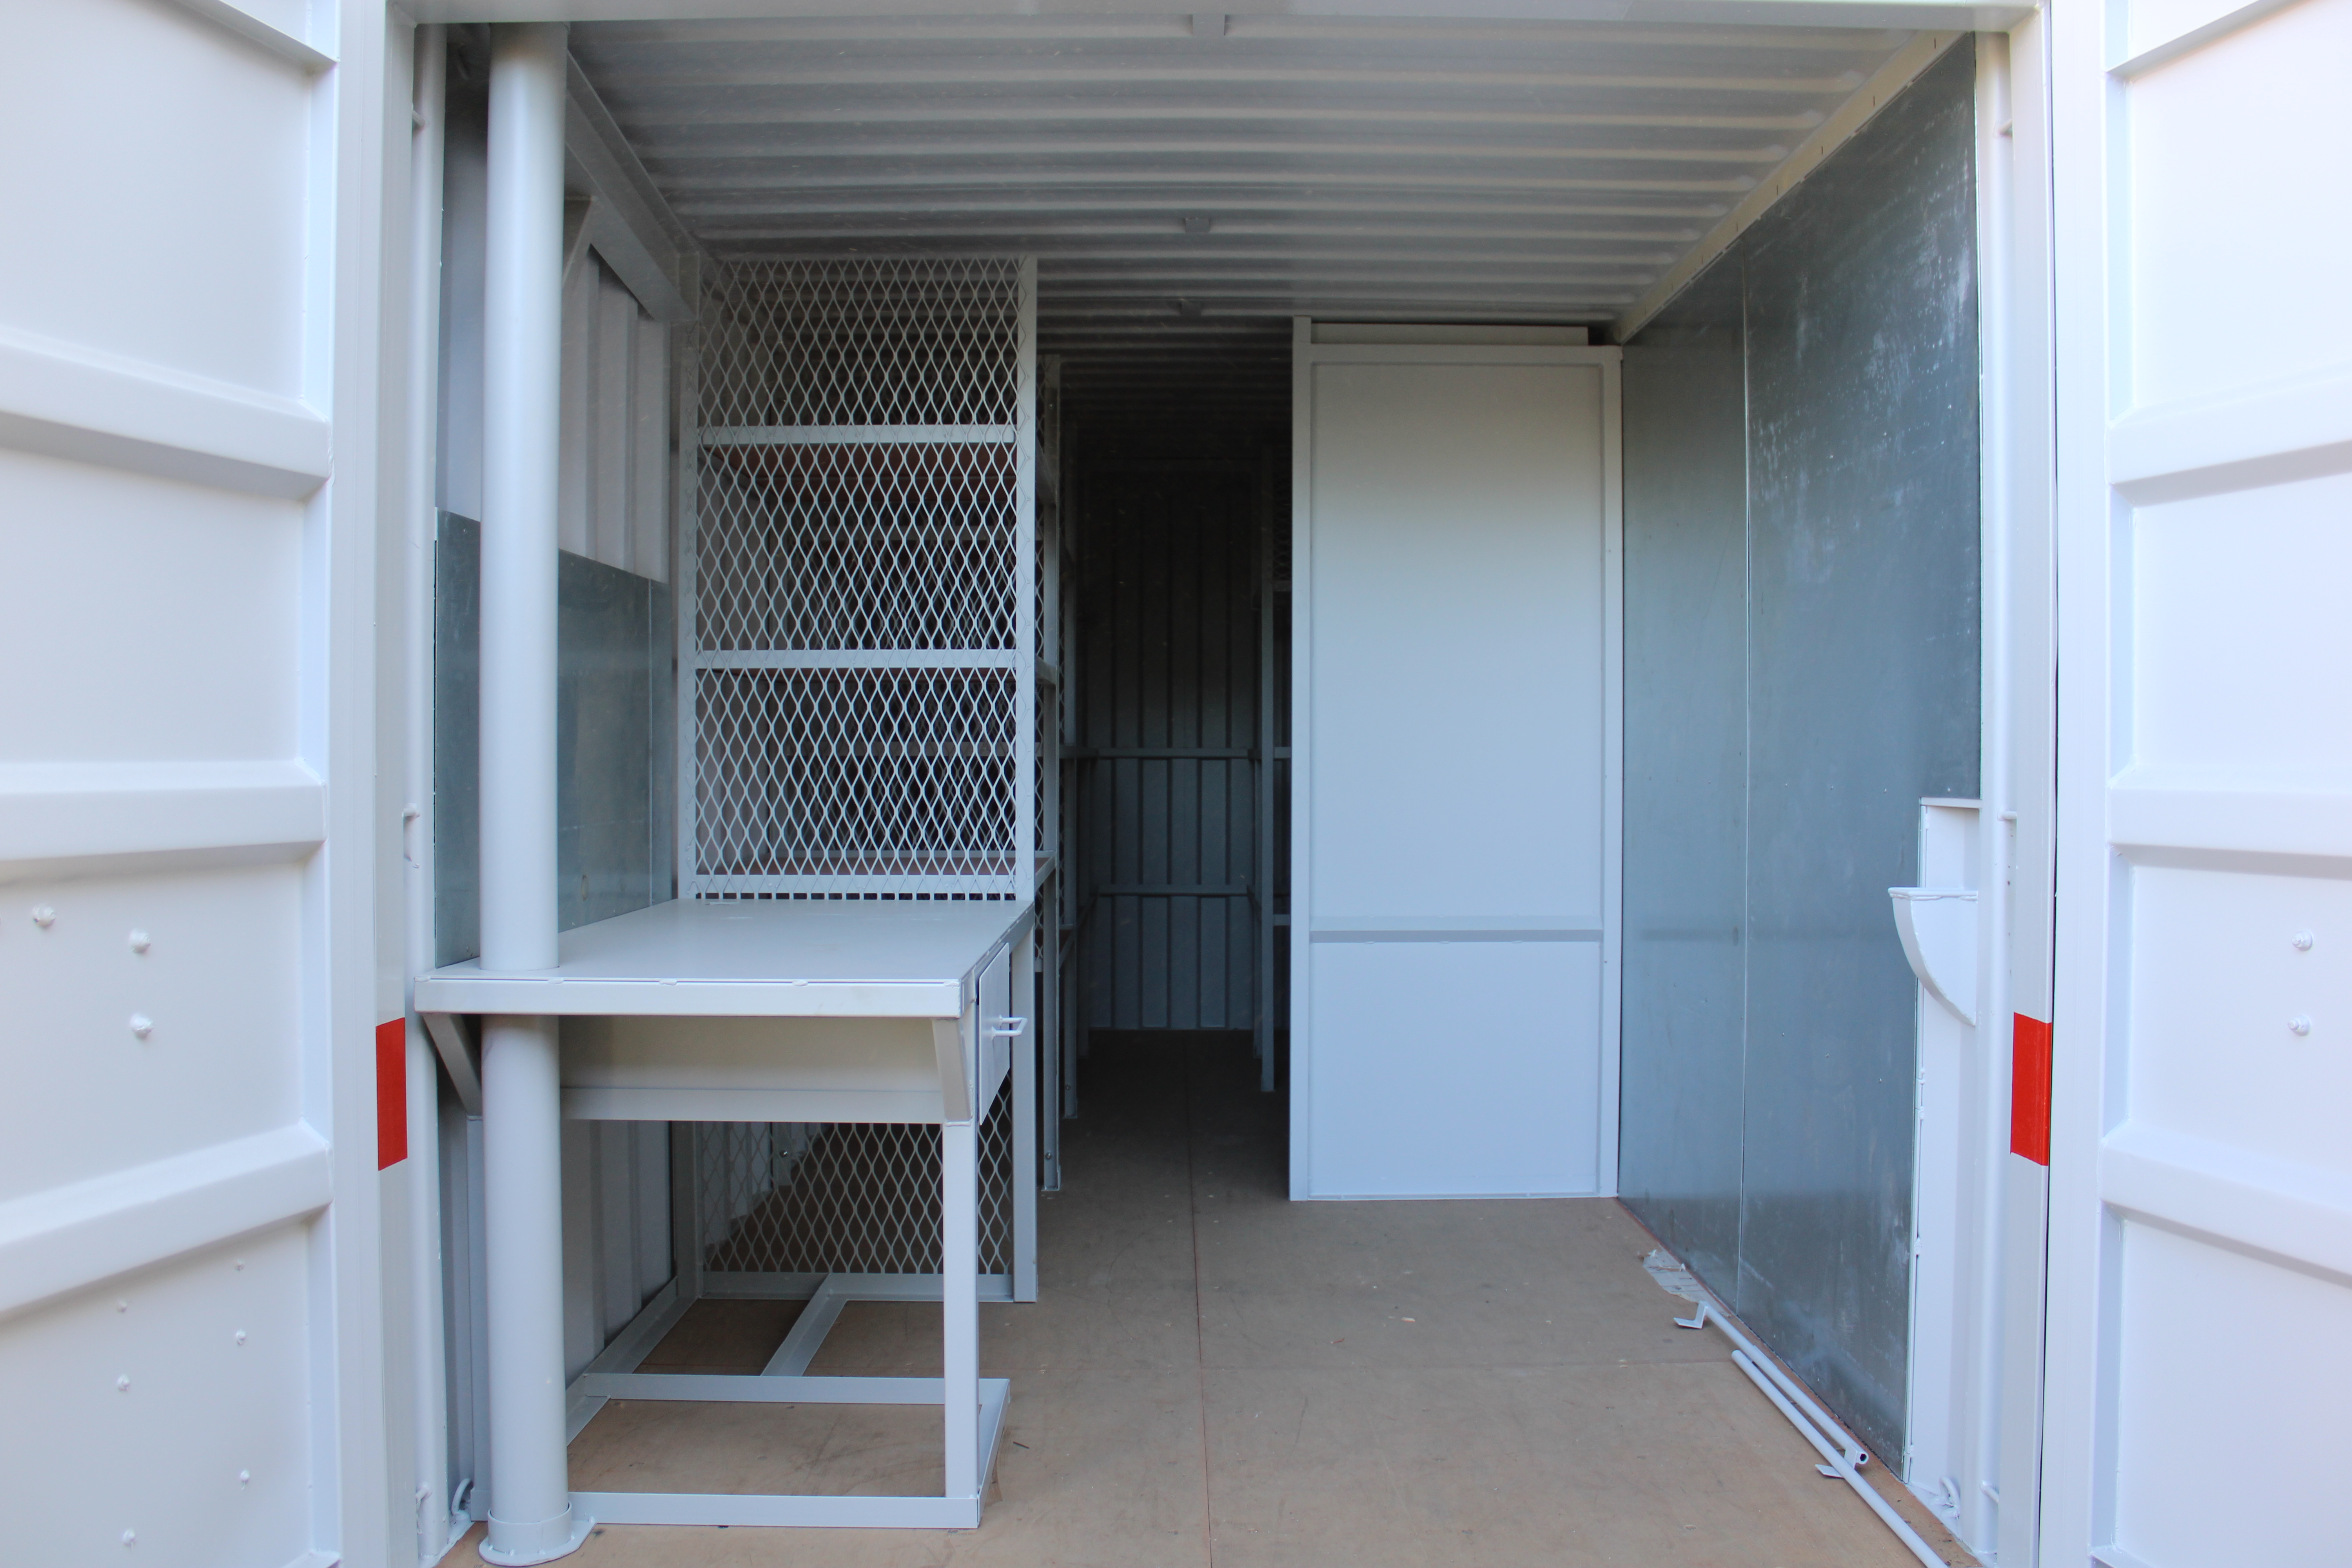 Shipping container changing rooms and locker room